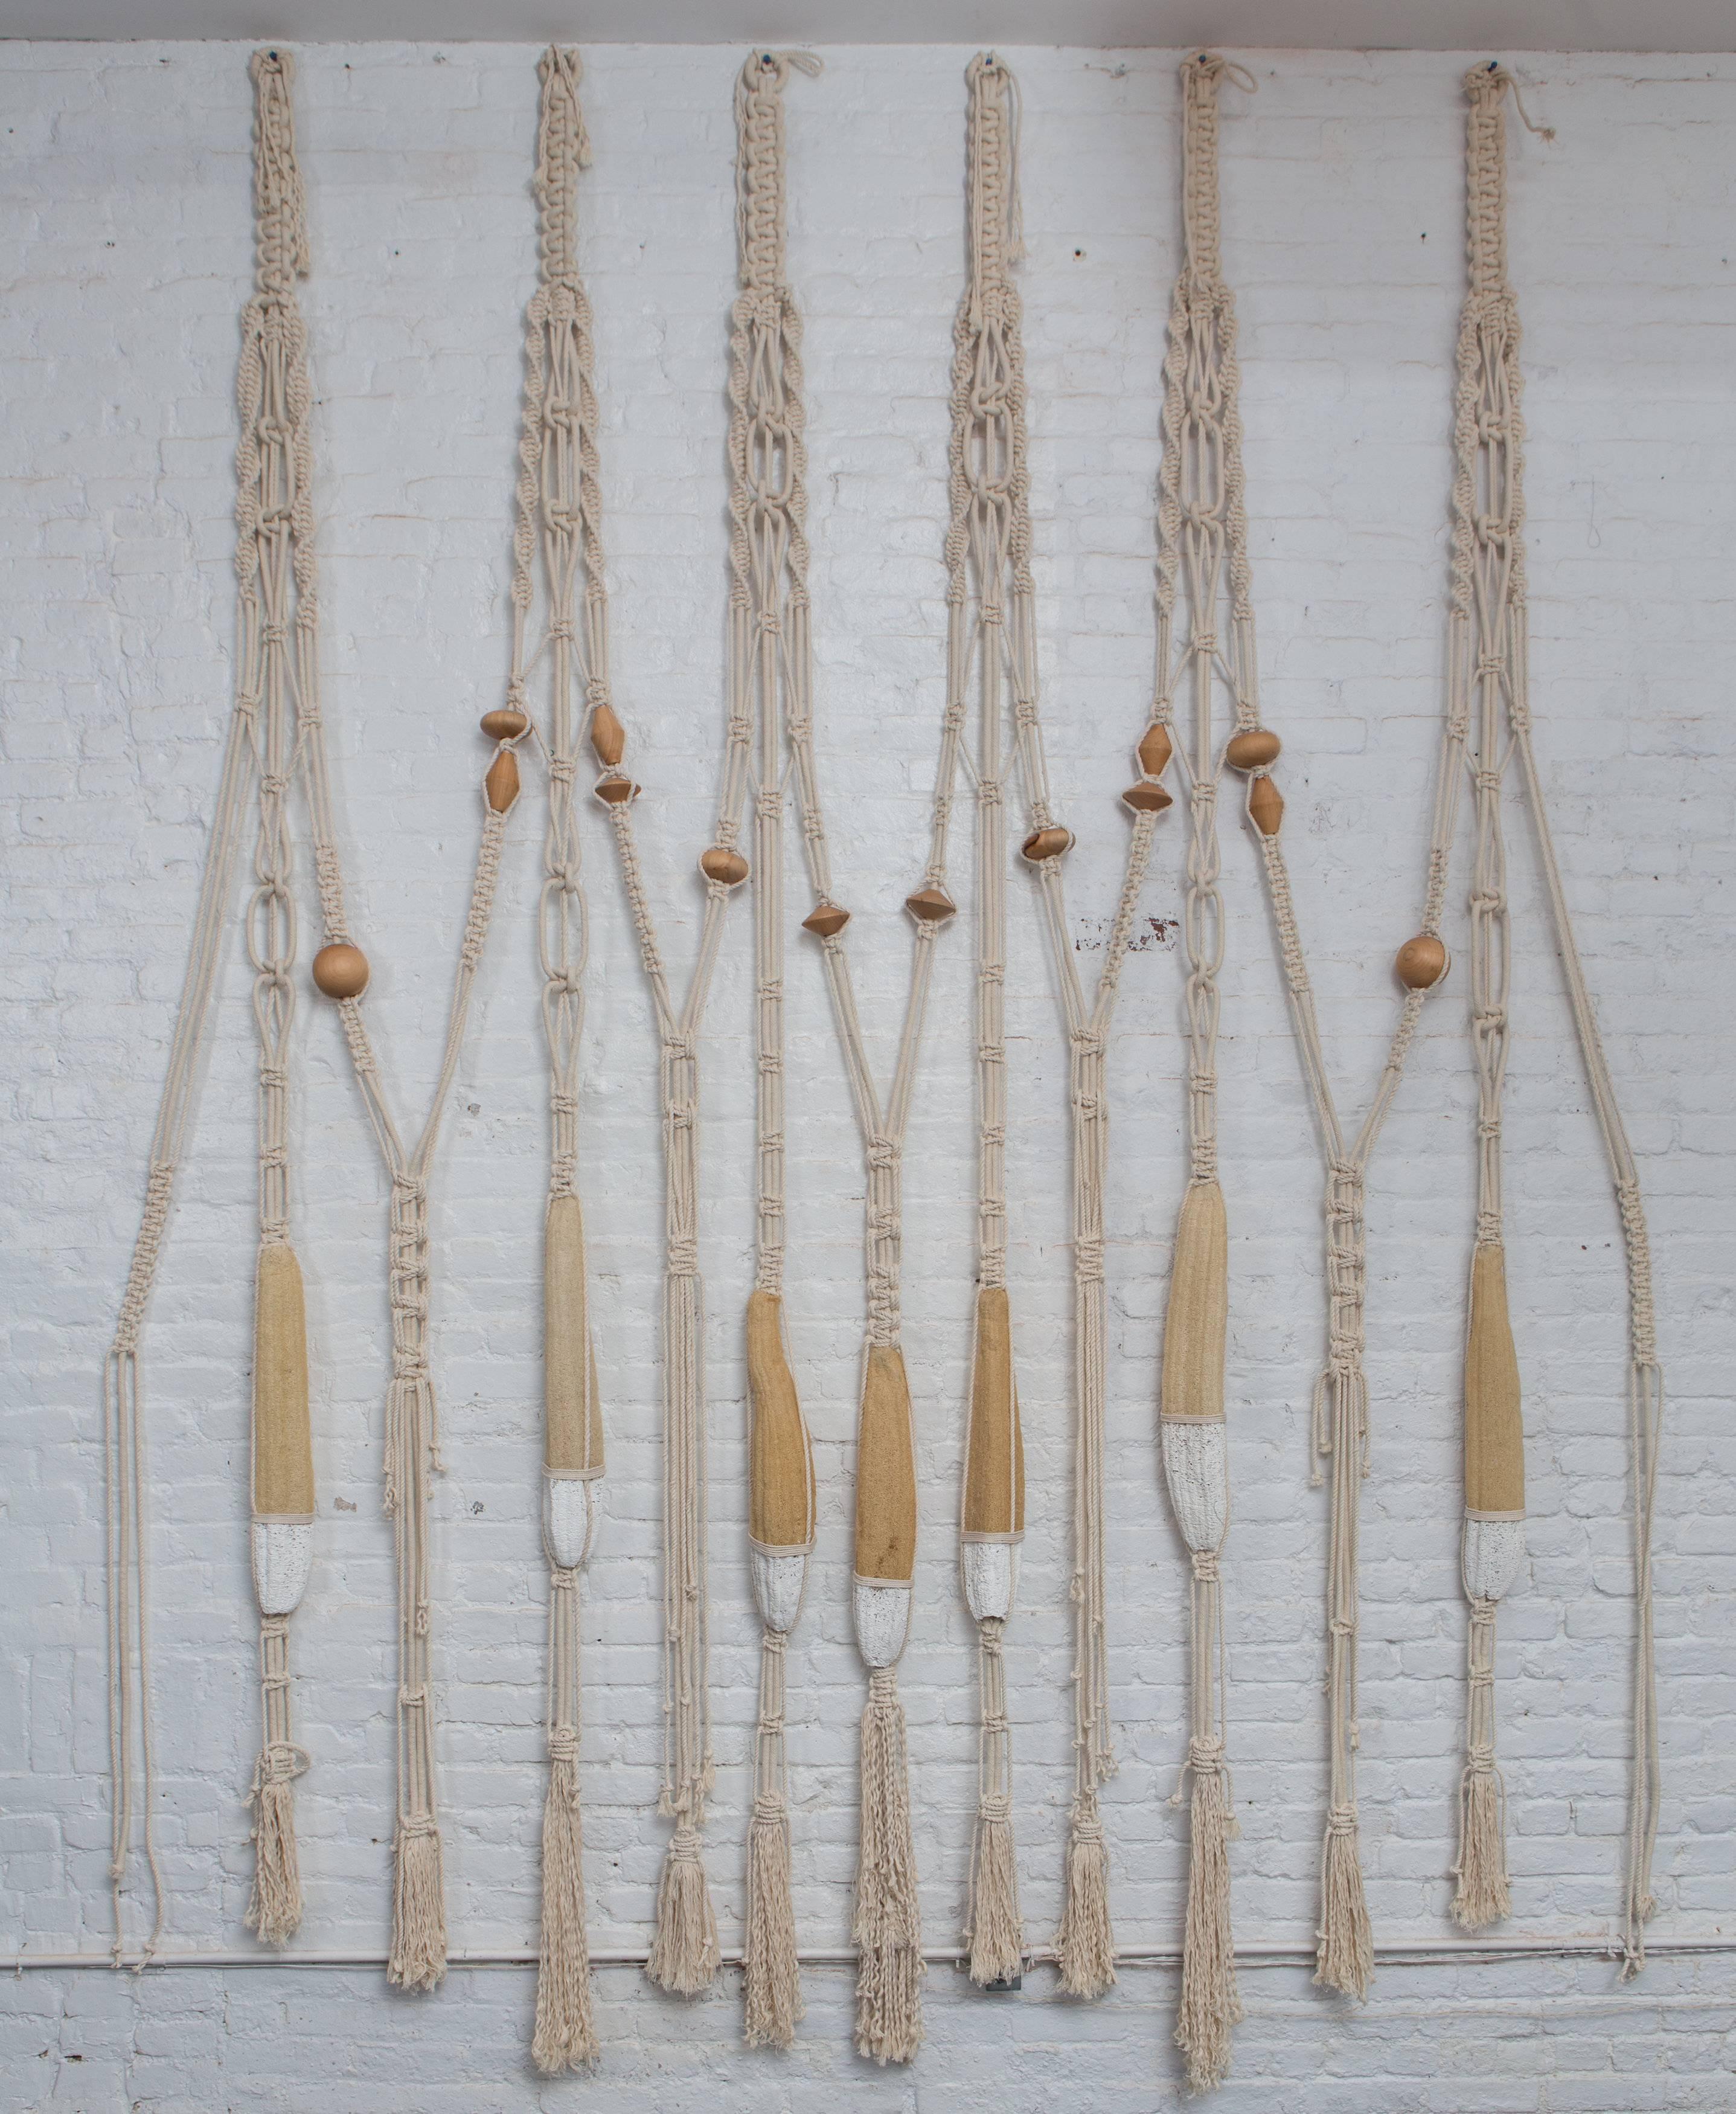 Hand braided macrame wall hanging with handmade teak beads by Oscar Ruiz Schmidt and Barbara Cuevas for Valenzuela. These two creatives, who co-own a fashion company in Costa Rica, produced this wall hanging for a show at reGeneration entitled, Two